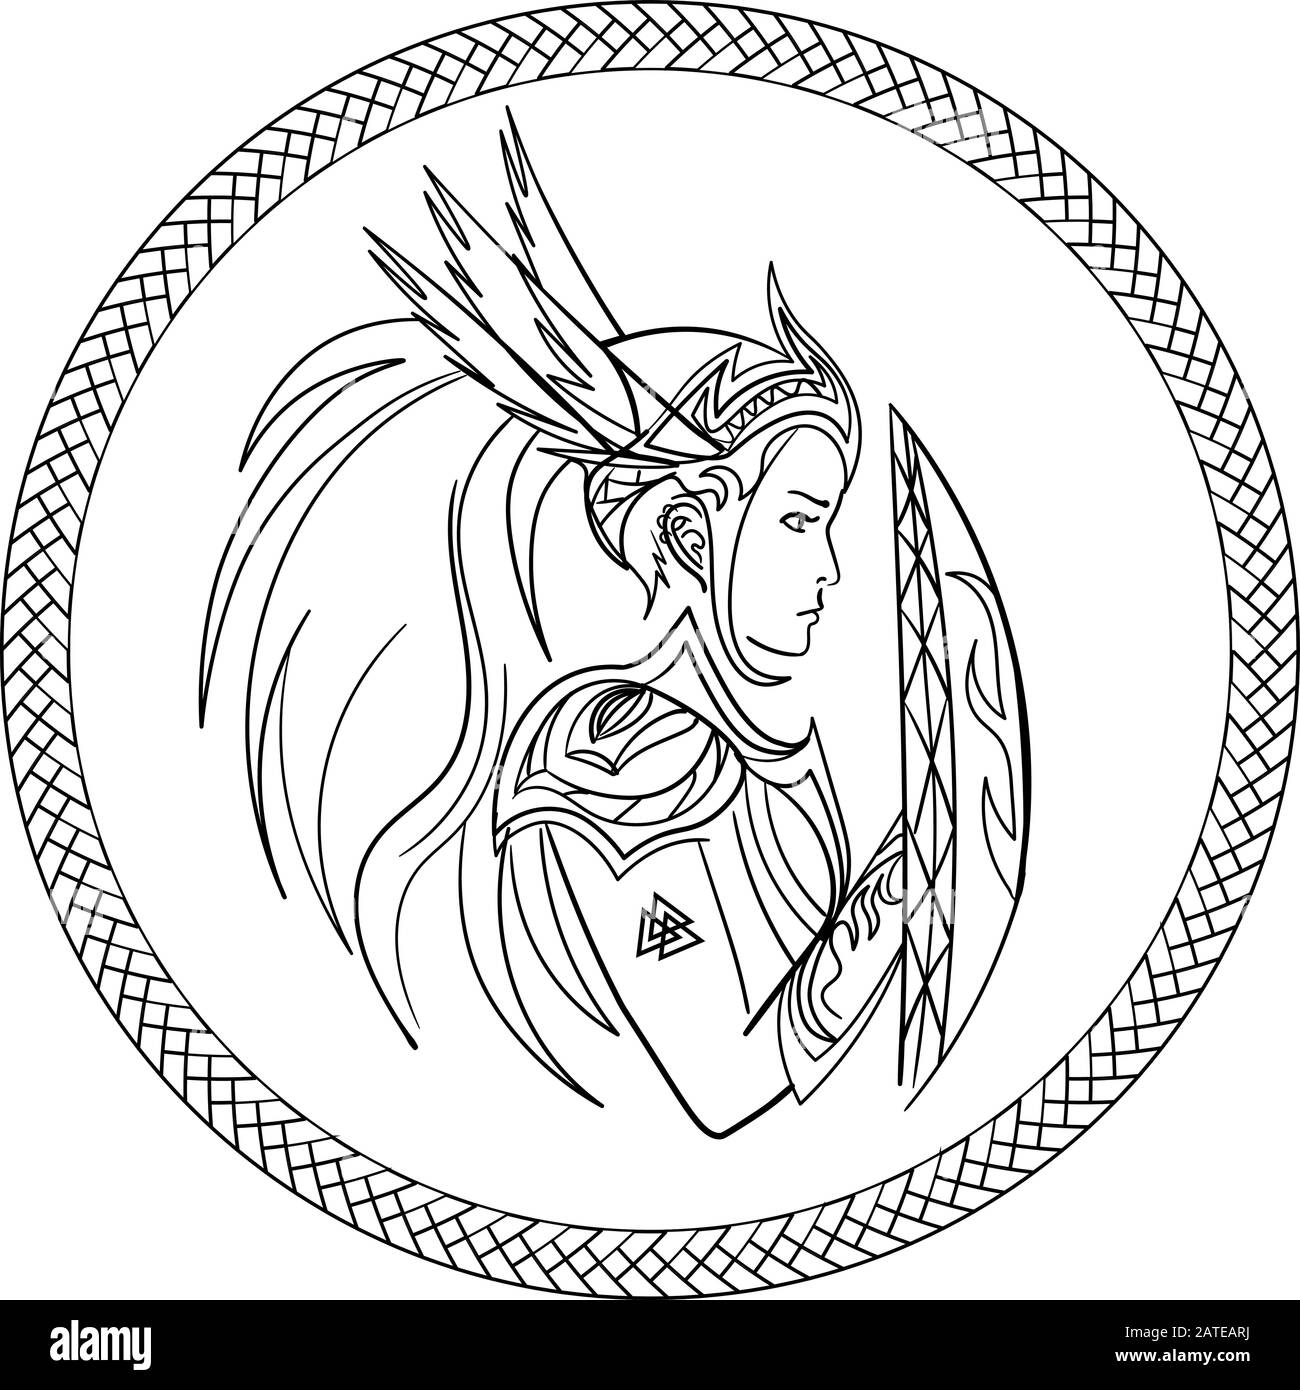 Contour valkyrie, scandinavian woman warrior, with shield in ornamented circle Stock Vector